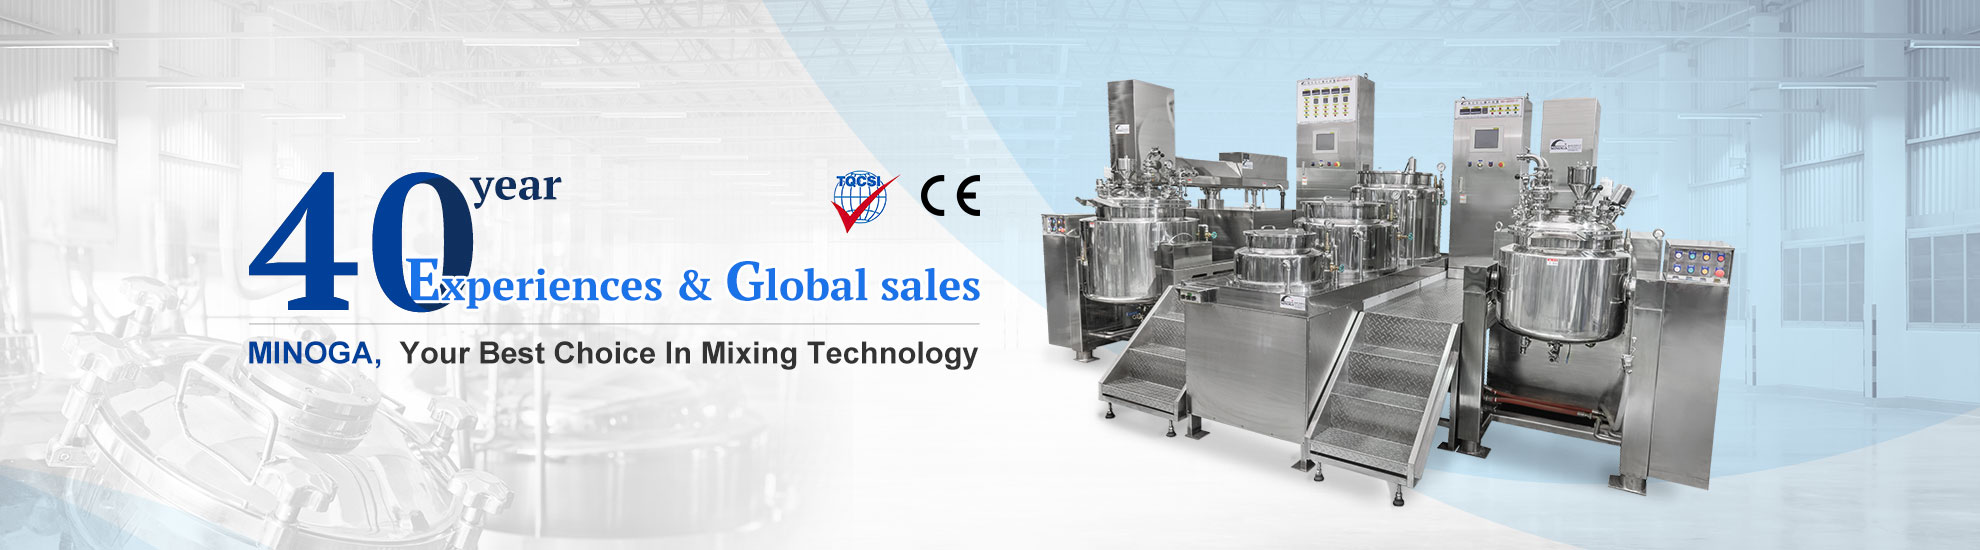 40 year Experiences & global sales MINOGA, your best choice in mixing technology